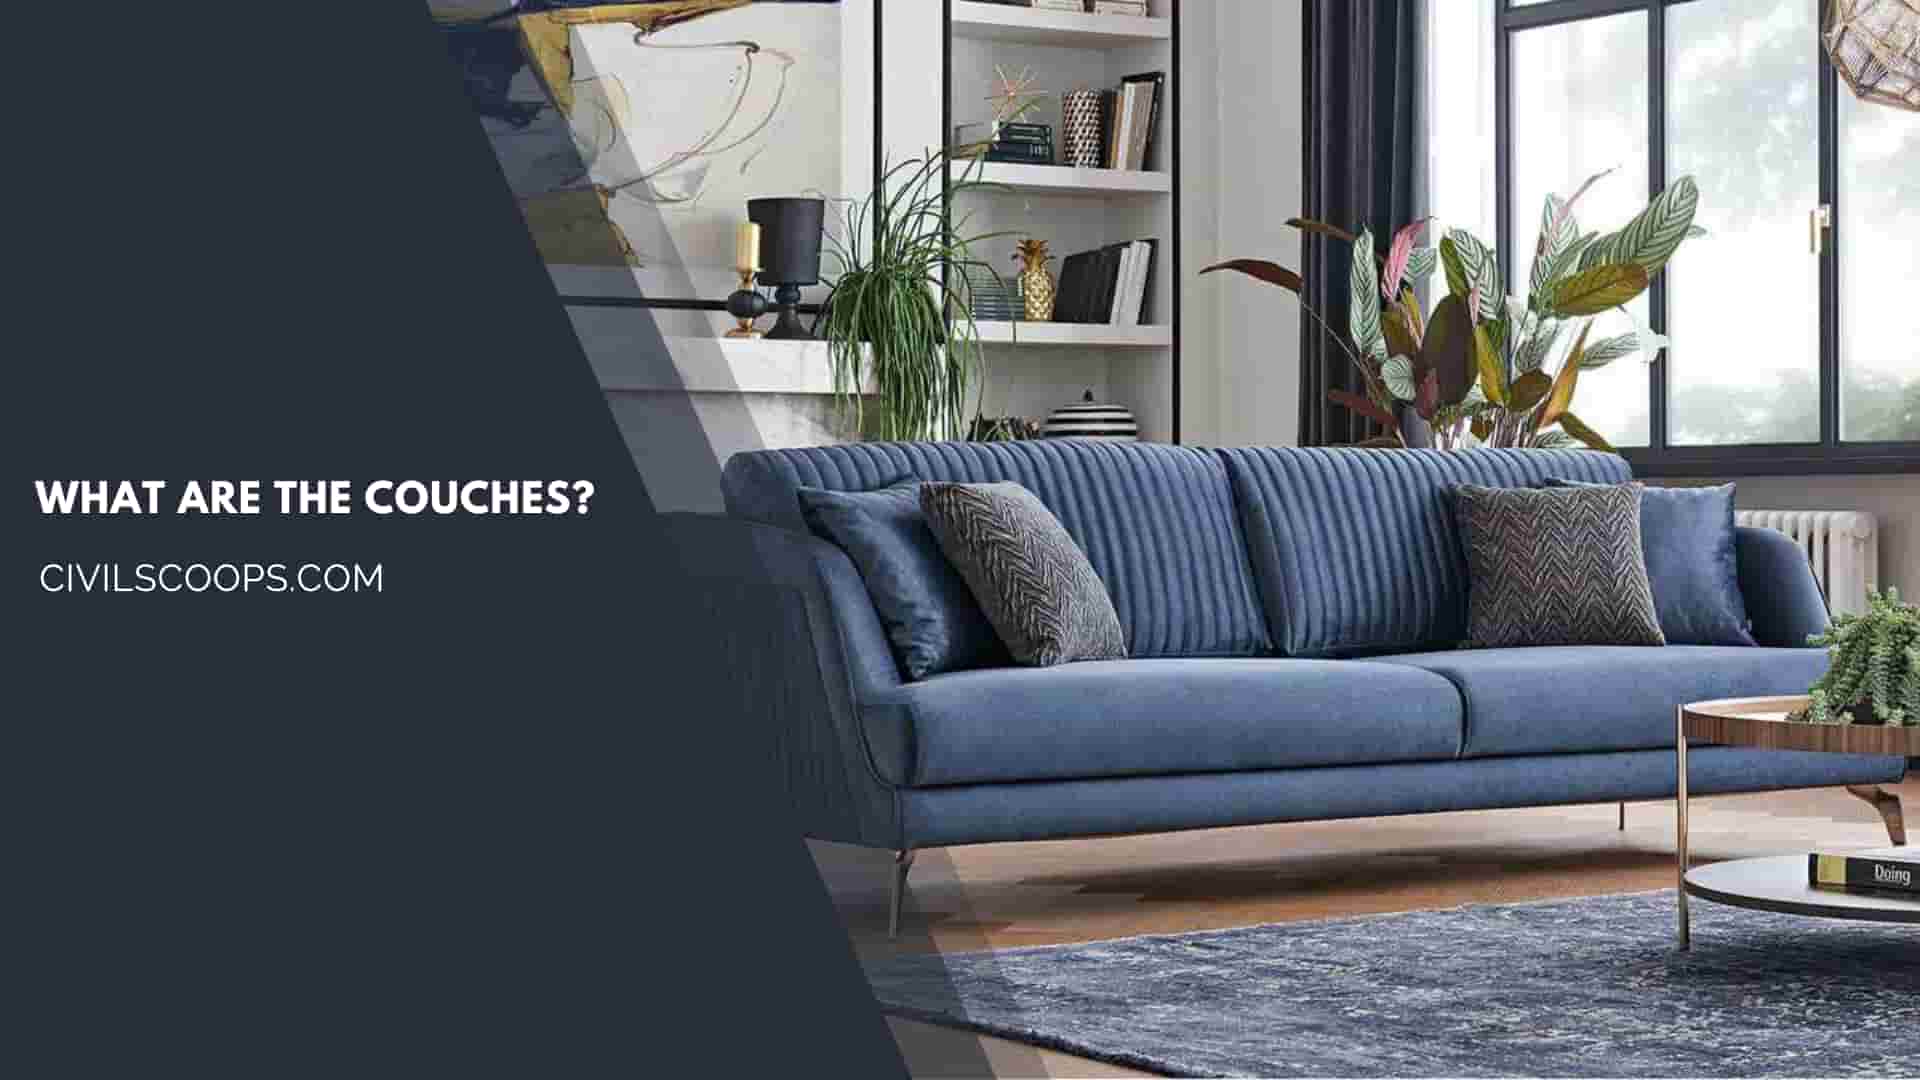 What Are the Couches?